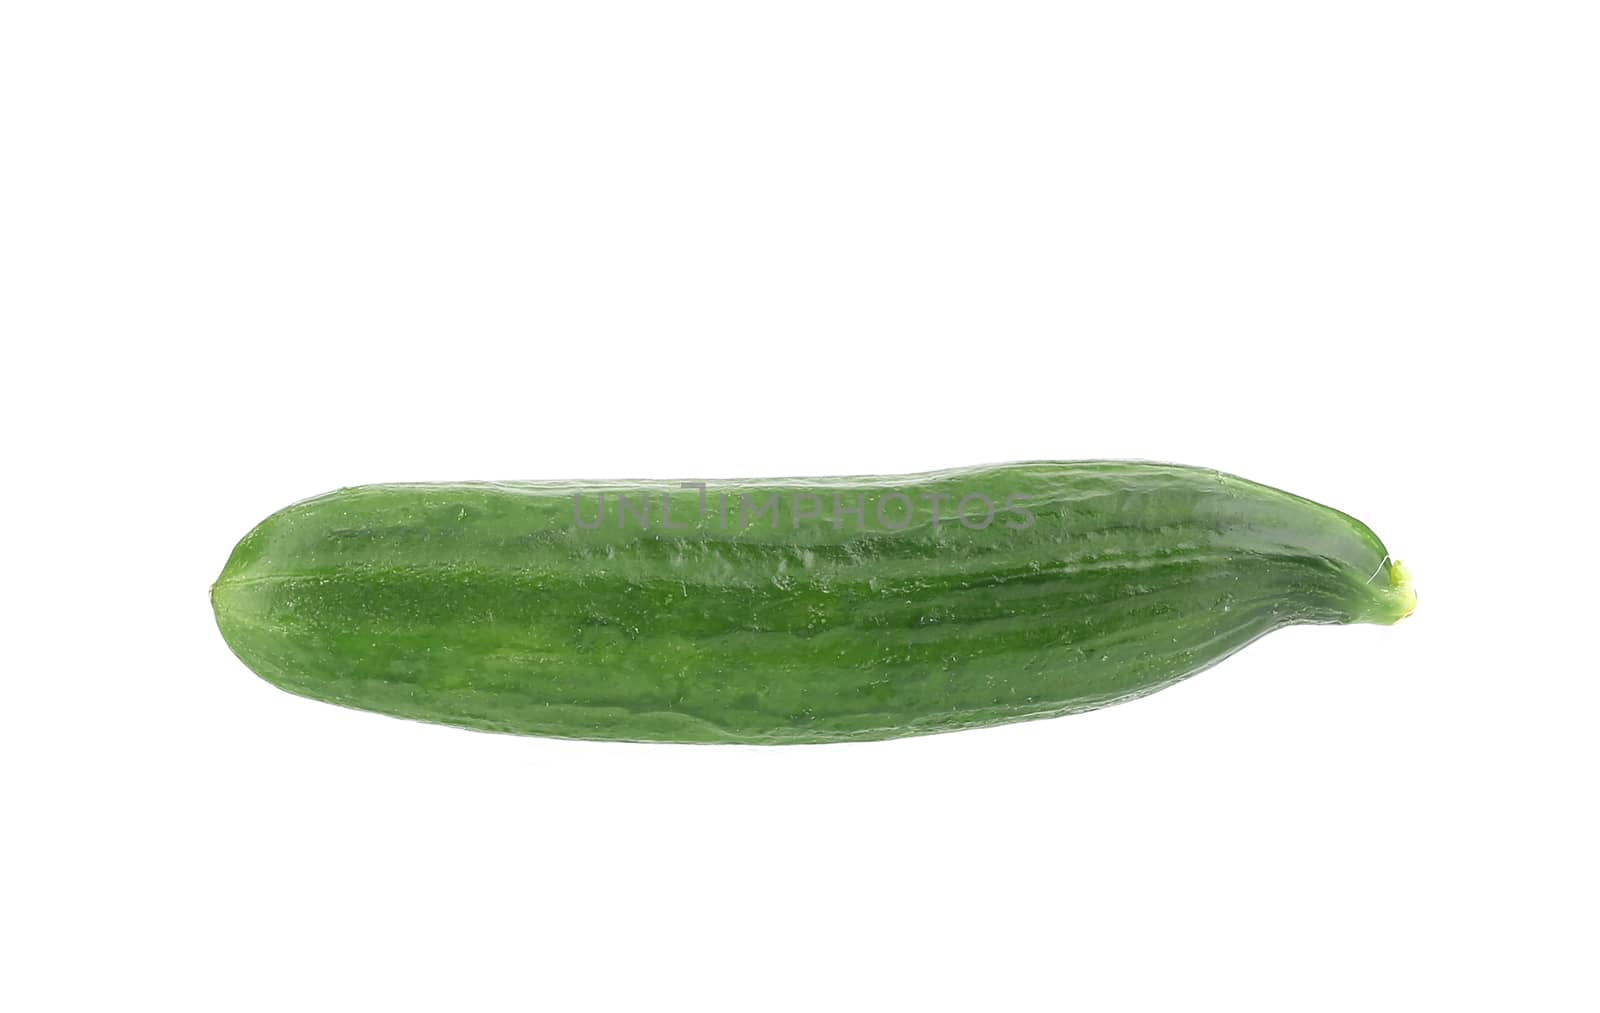 Fresh cucumber. Isolated on a white background.